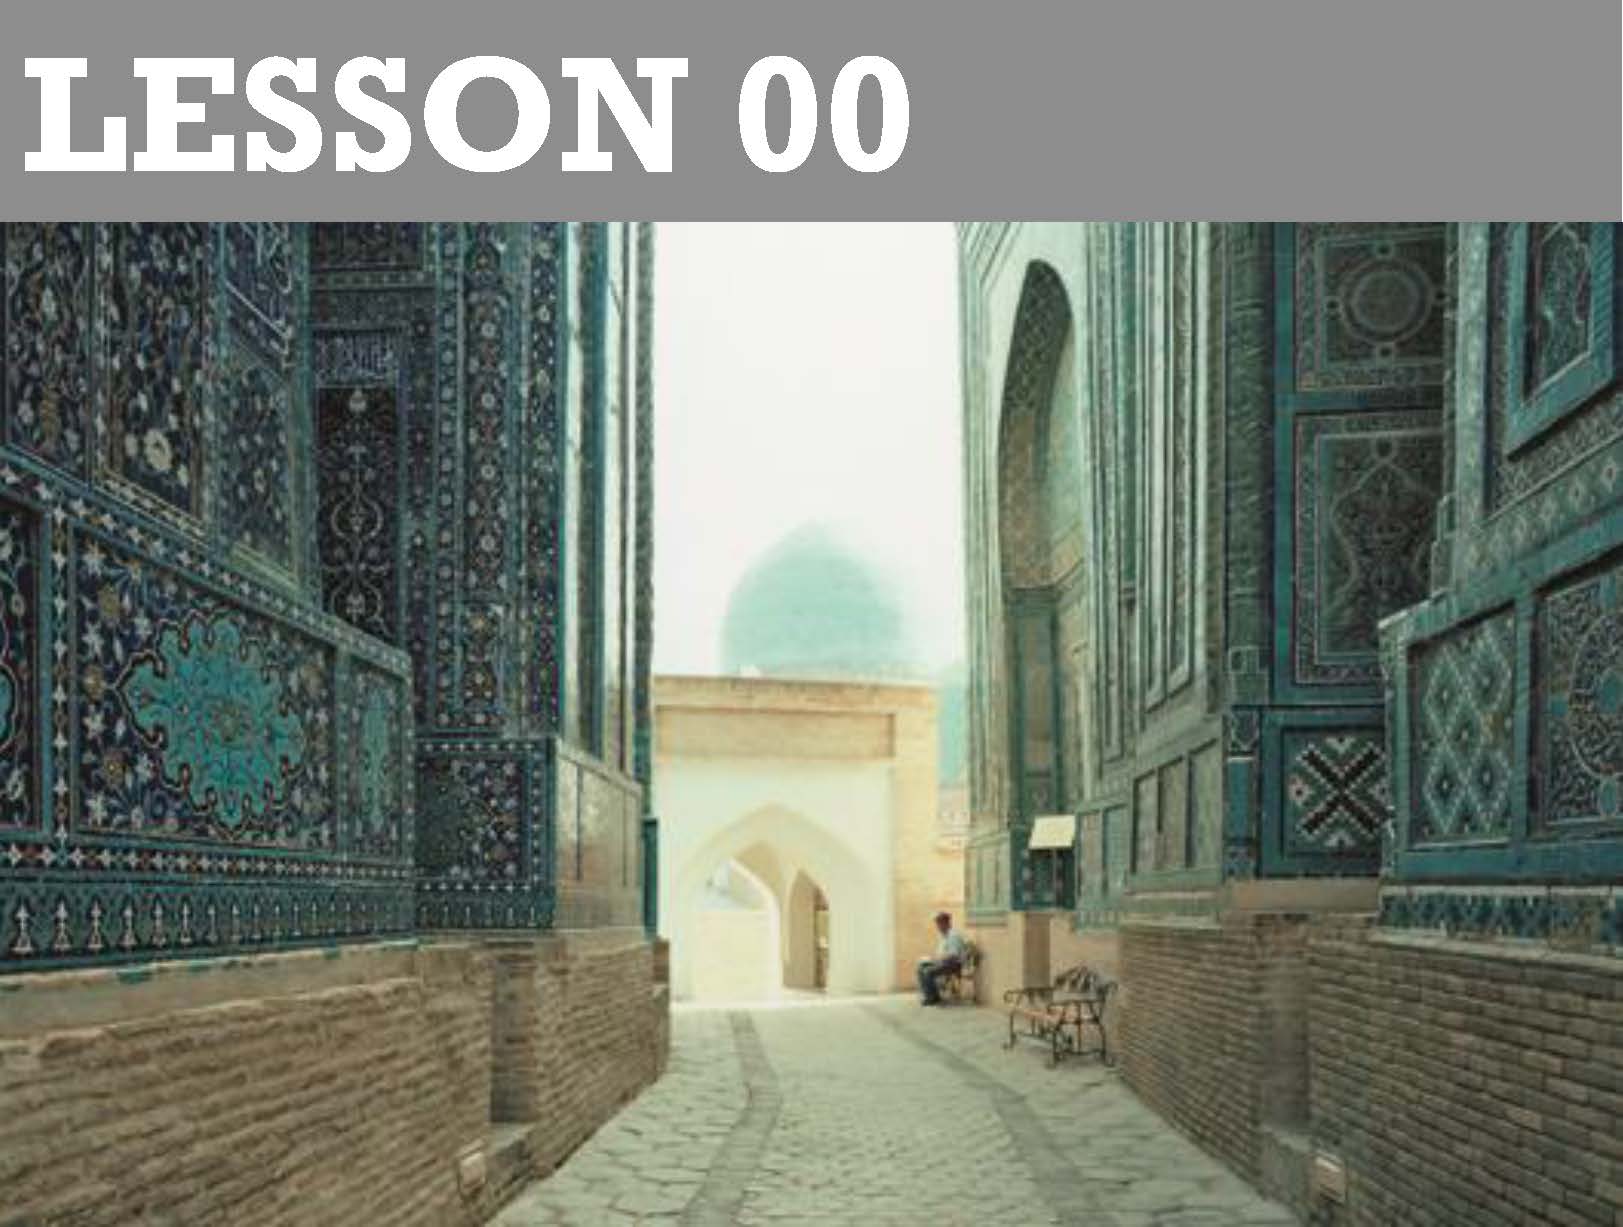 Lesson 00: Introduction to Islamic Architecture